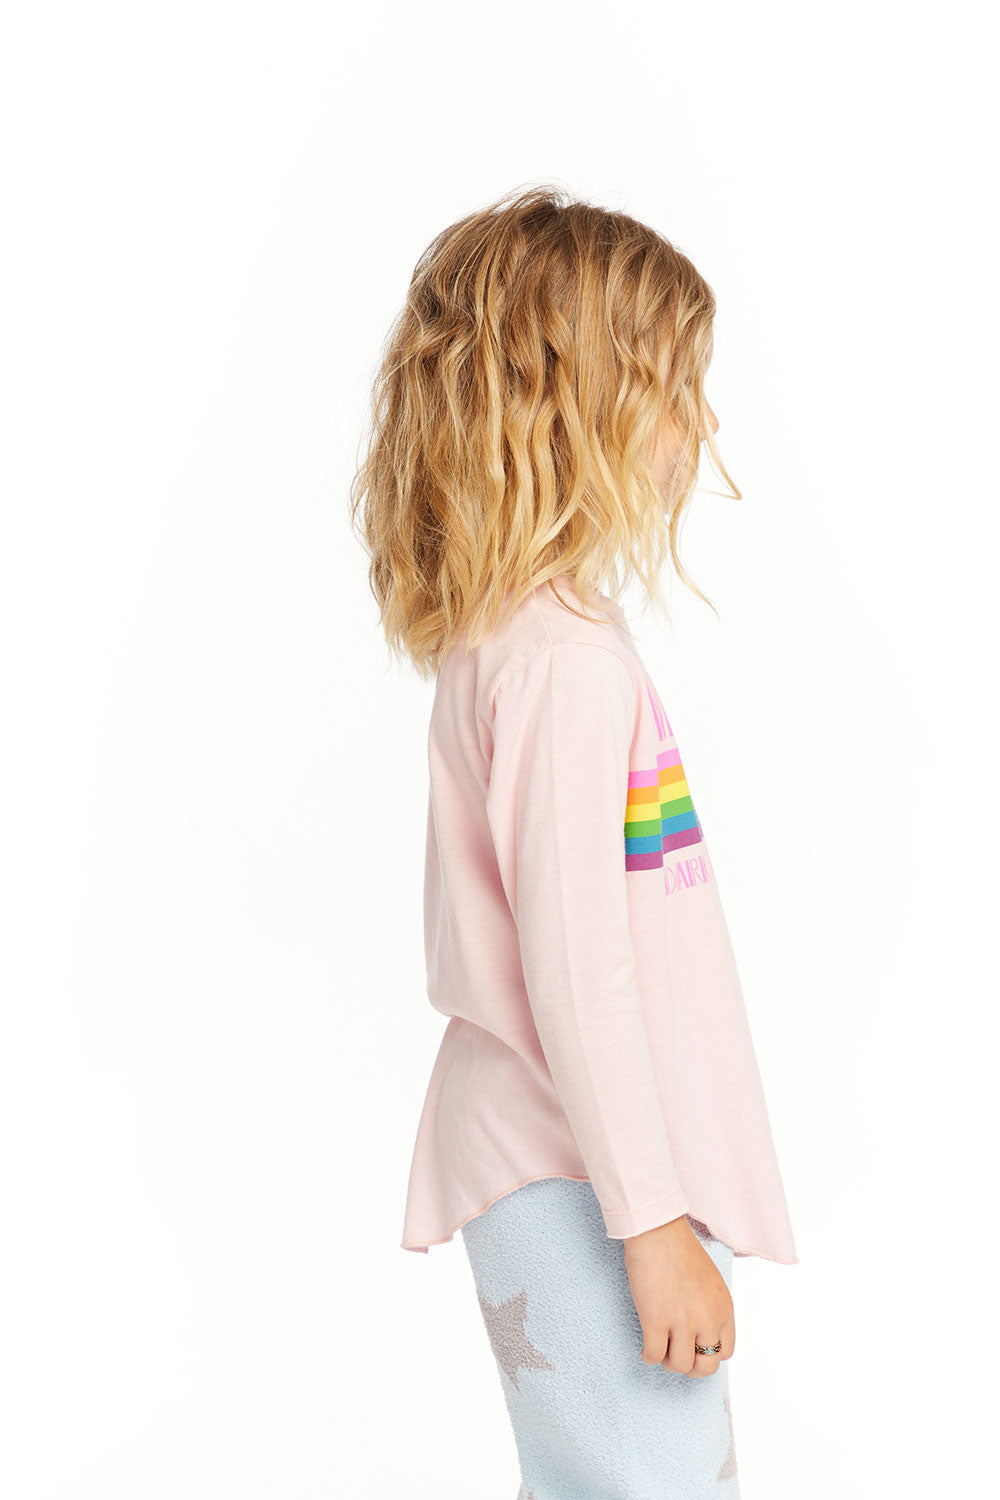 Pink Floyd Dark Side of the Moon Long Sleeve GIRLS chaserbrand